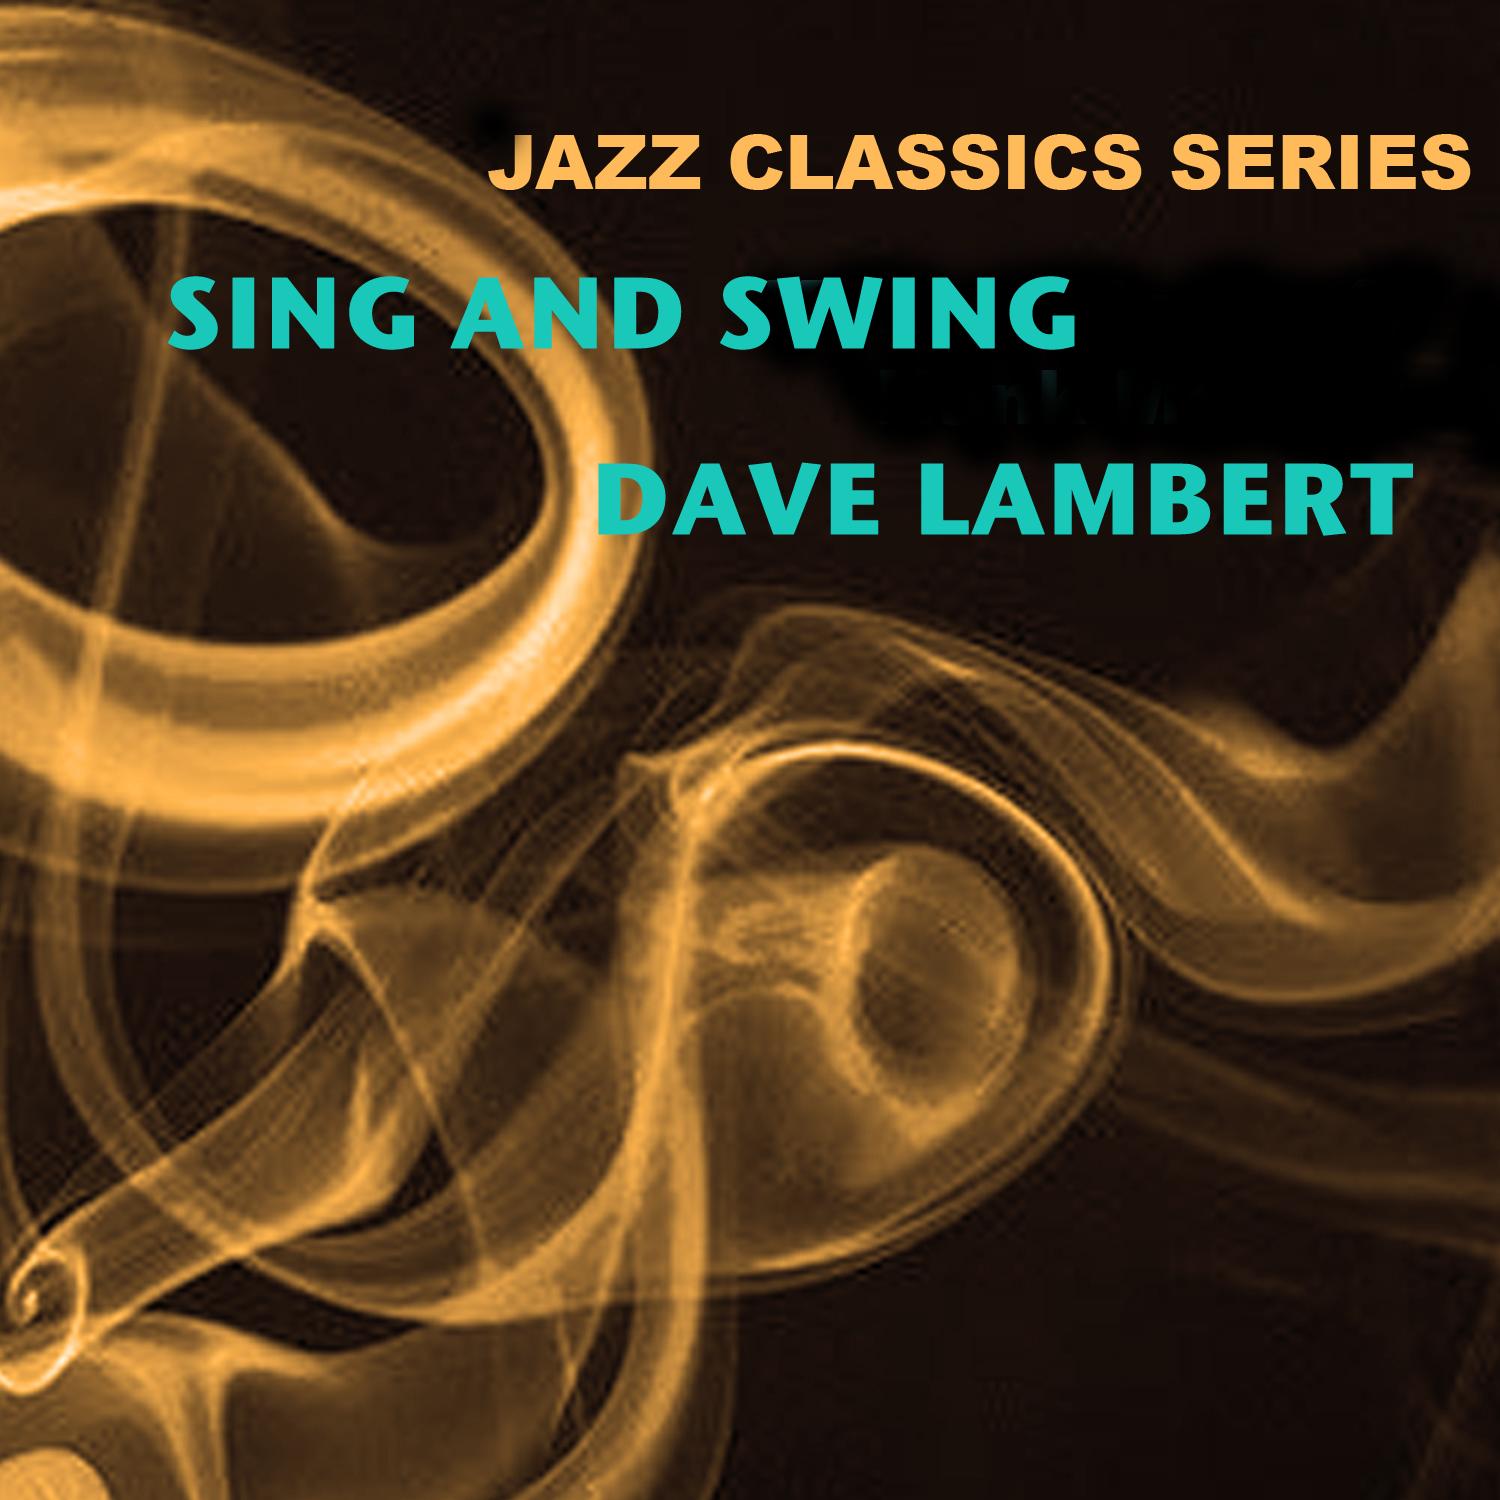 Jazz Classics Series: Sing and Swing